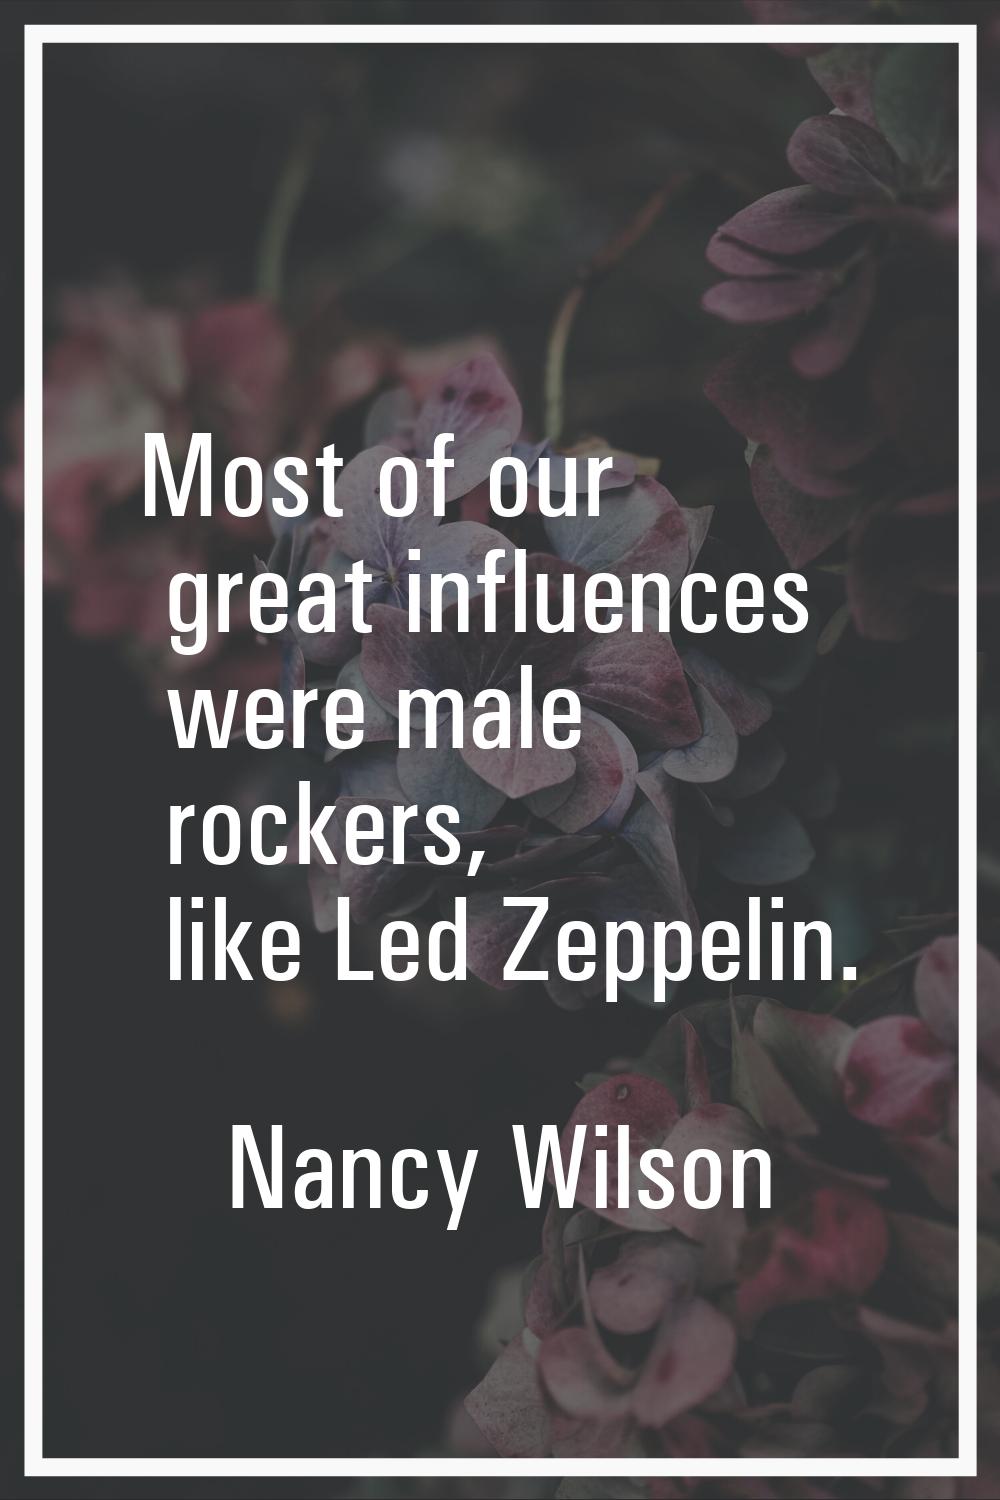 Most of our great influences were male rockers, like Led Zeppelin.